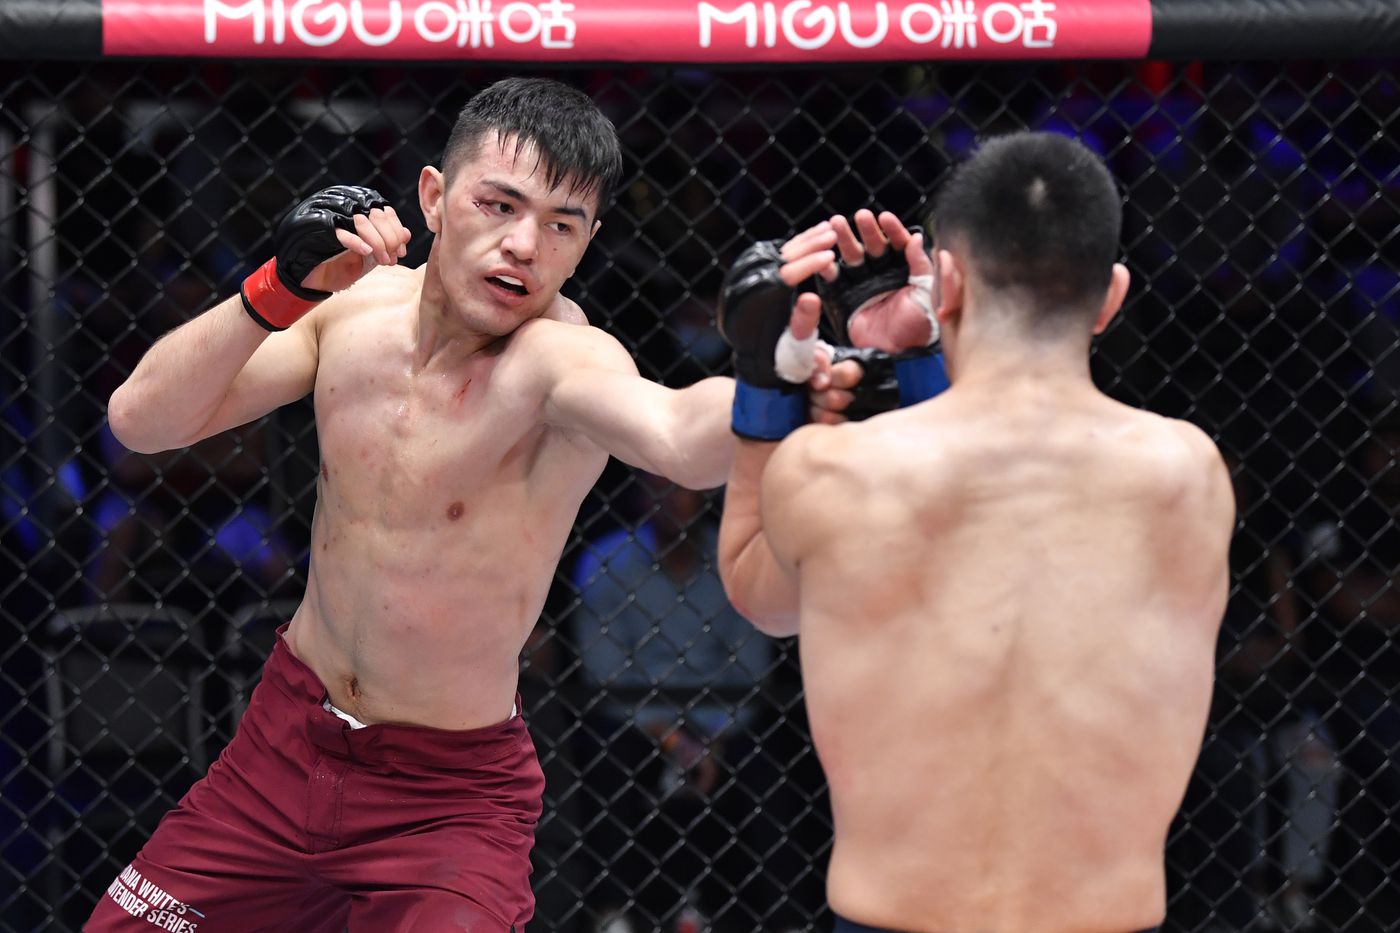 DWCS Season 5, Week 10 results: Maheshate first Chinese DWCS winner, 1 other contract awarded - MMA Fighting